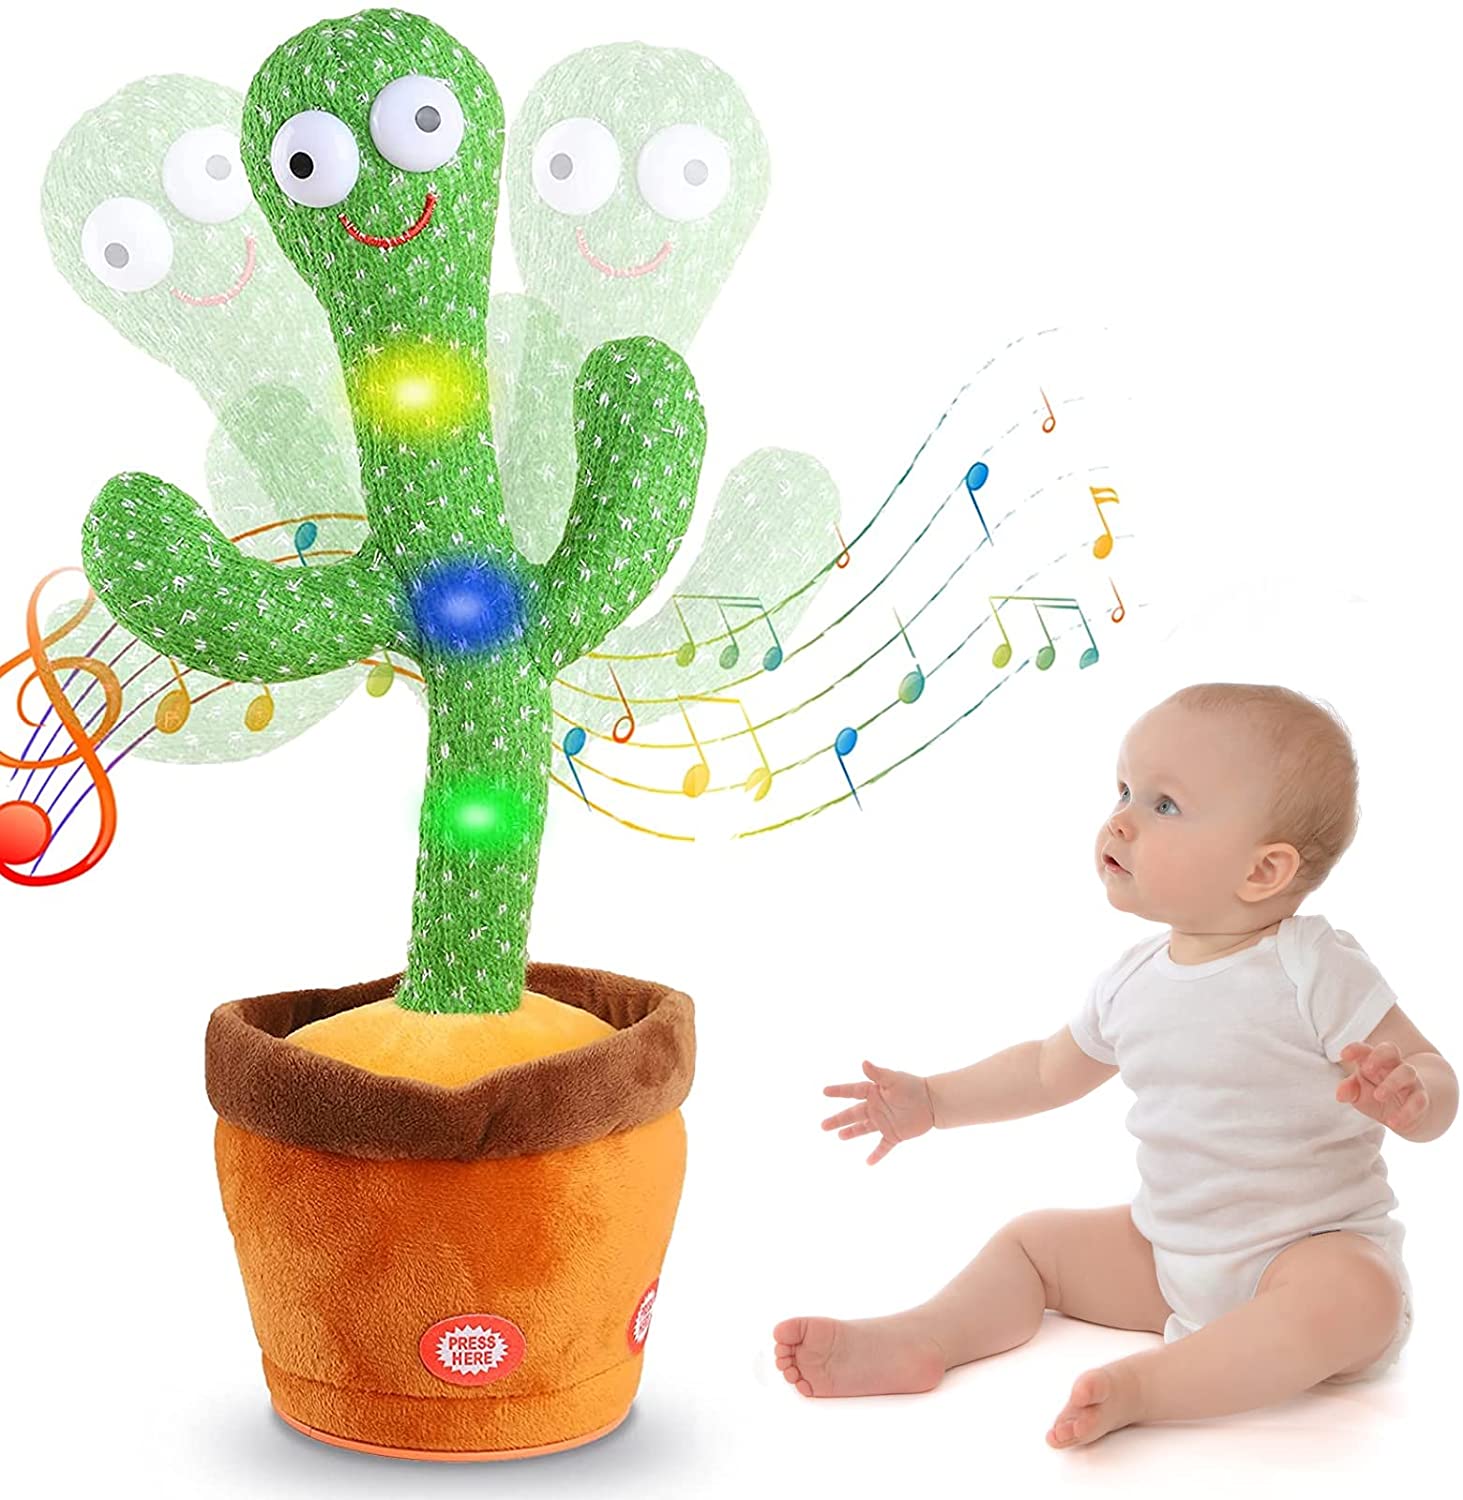 Mimicking Cactus Toy for Babies Singing Dancing Talking Cactus Repeats What You Say Soft Plush Cactus Gift 120 Songs 